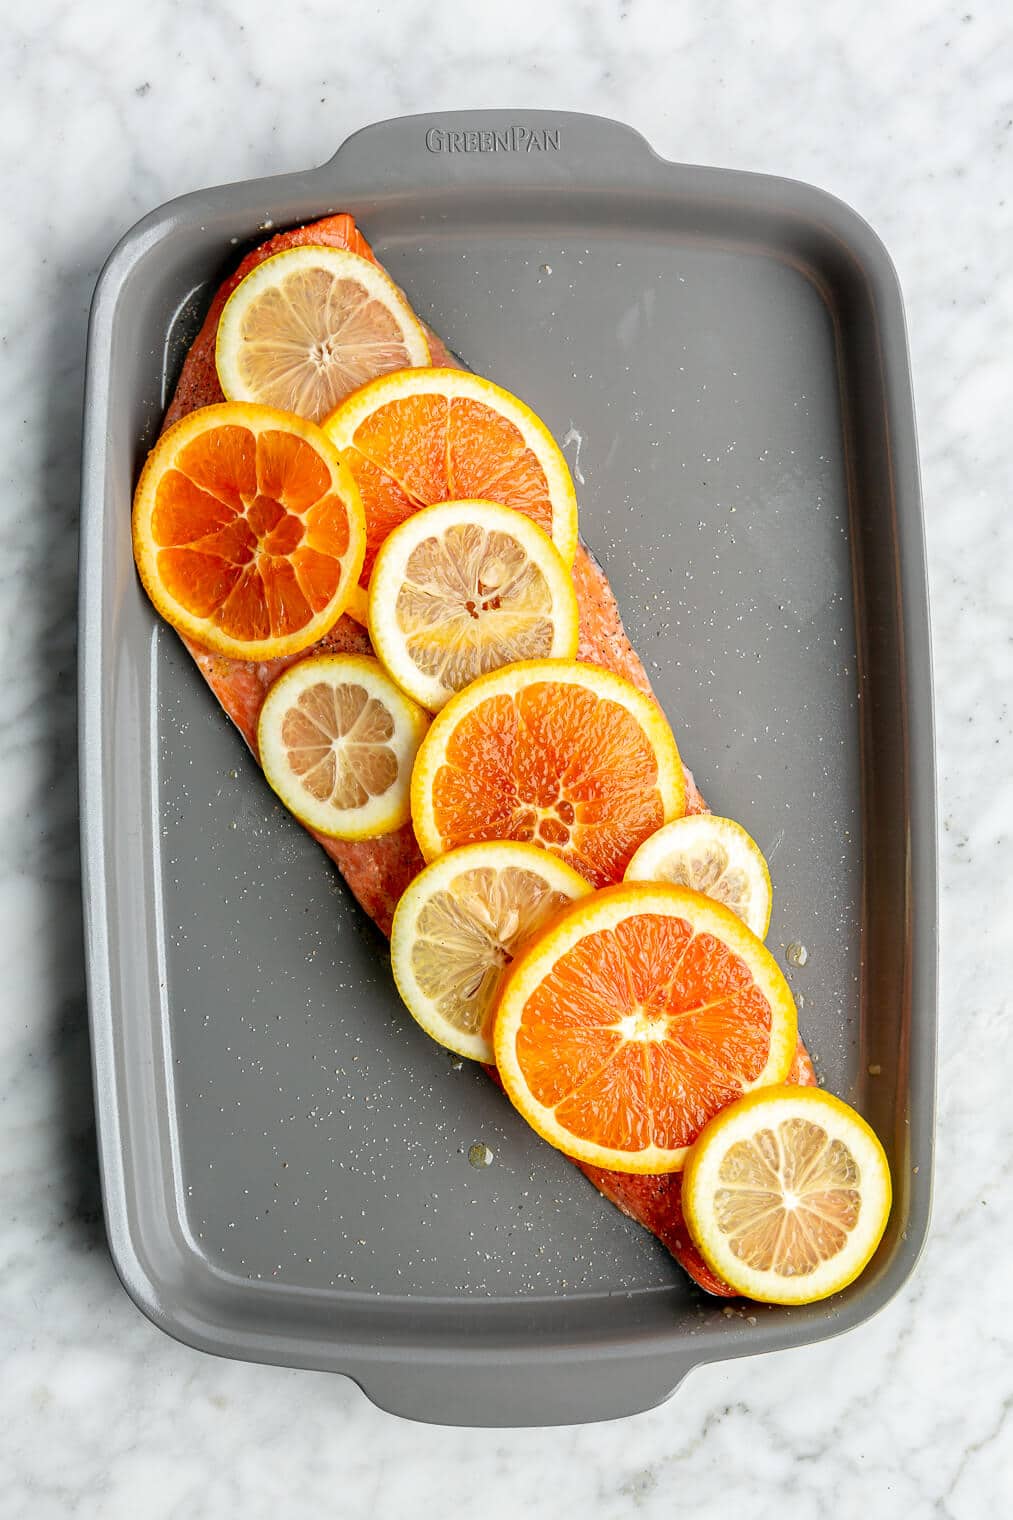 Salmon filet covered with citrus slices on a grey sheet pan.